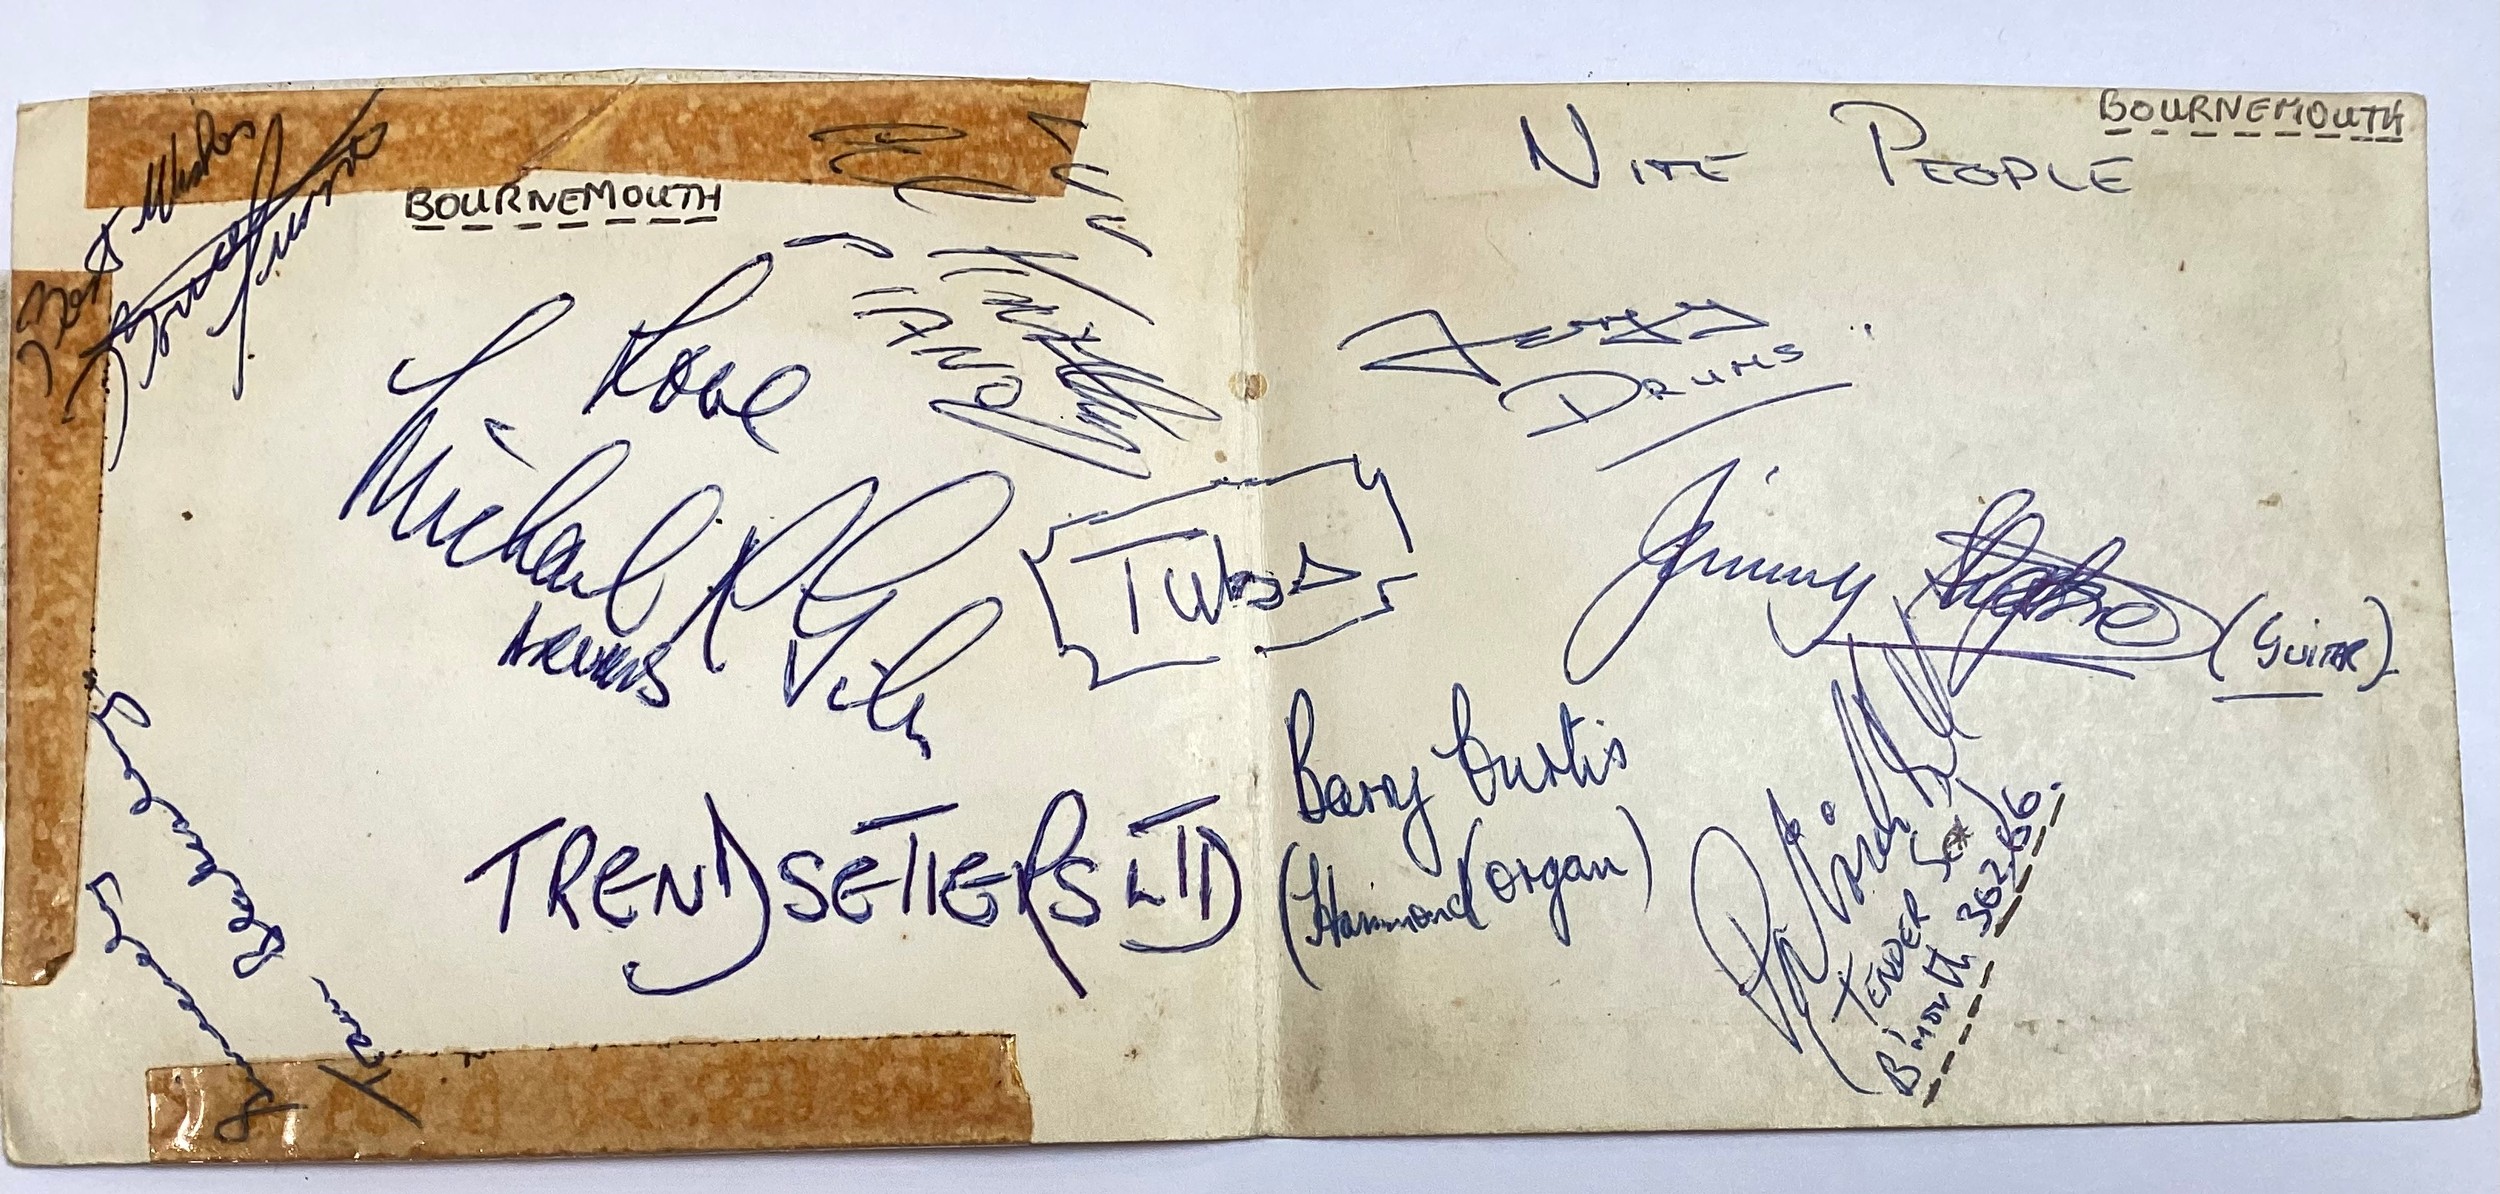 GENUINE 1960’S AUTOGRAPH BOOK CONTAINING VARIOUS POP / ROCK STARS. The book has seen better days - Image 10 of 14